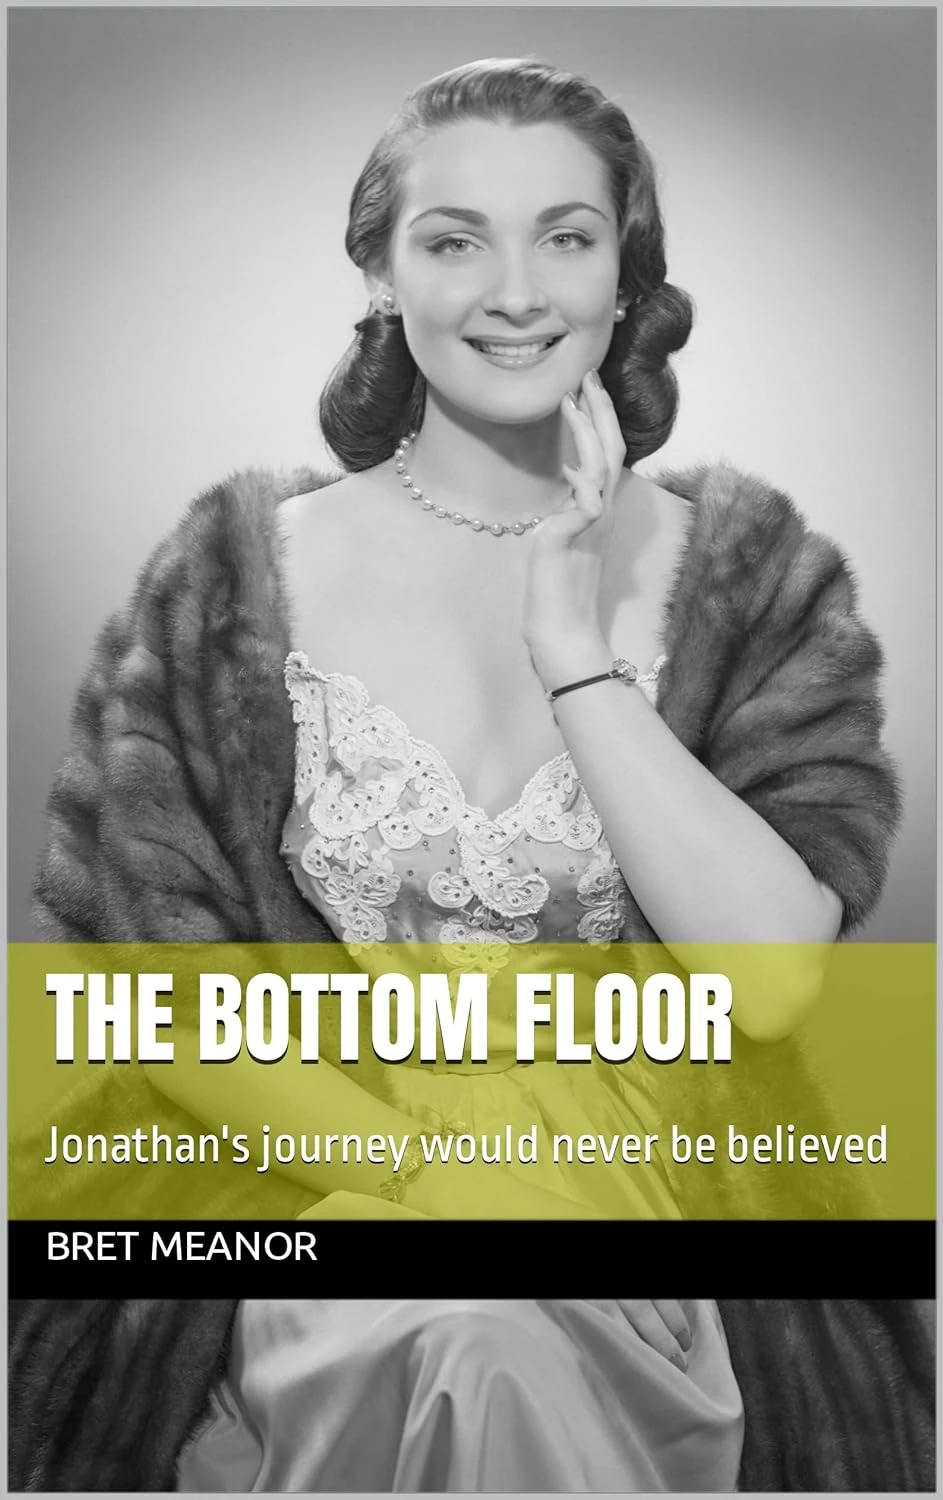 The Bottom Floor: Jonathan and Denise have a wild ride through the portals of time